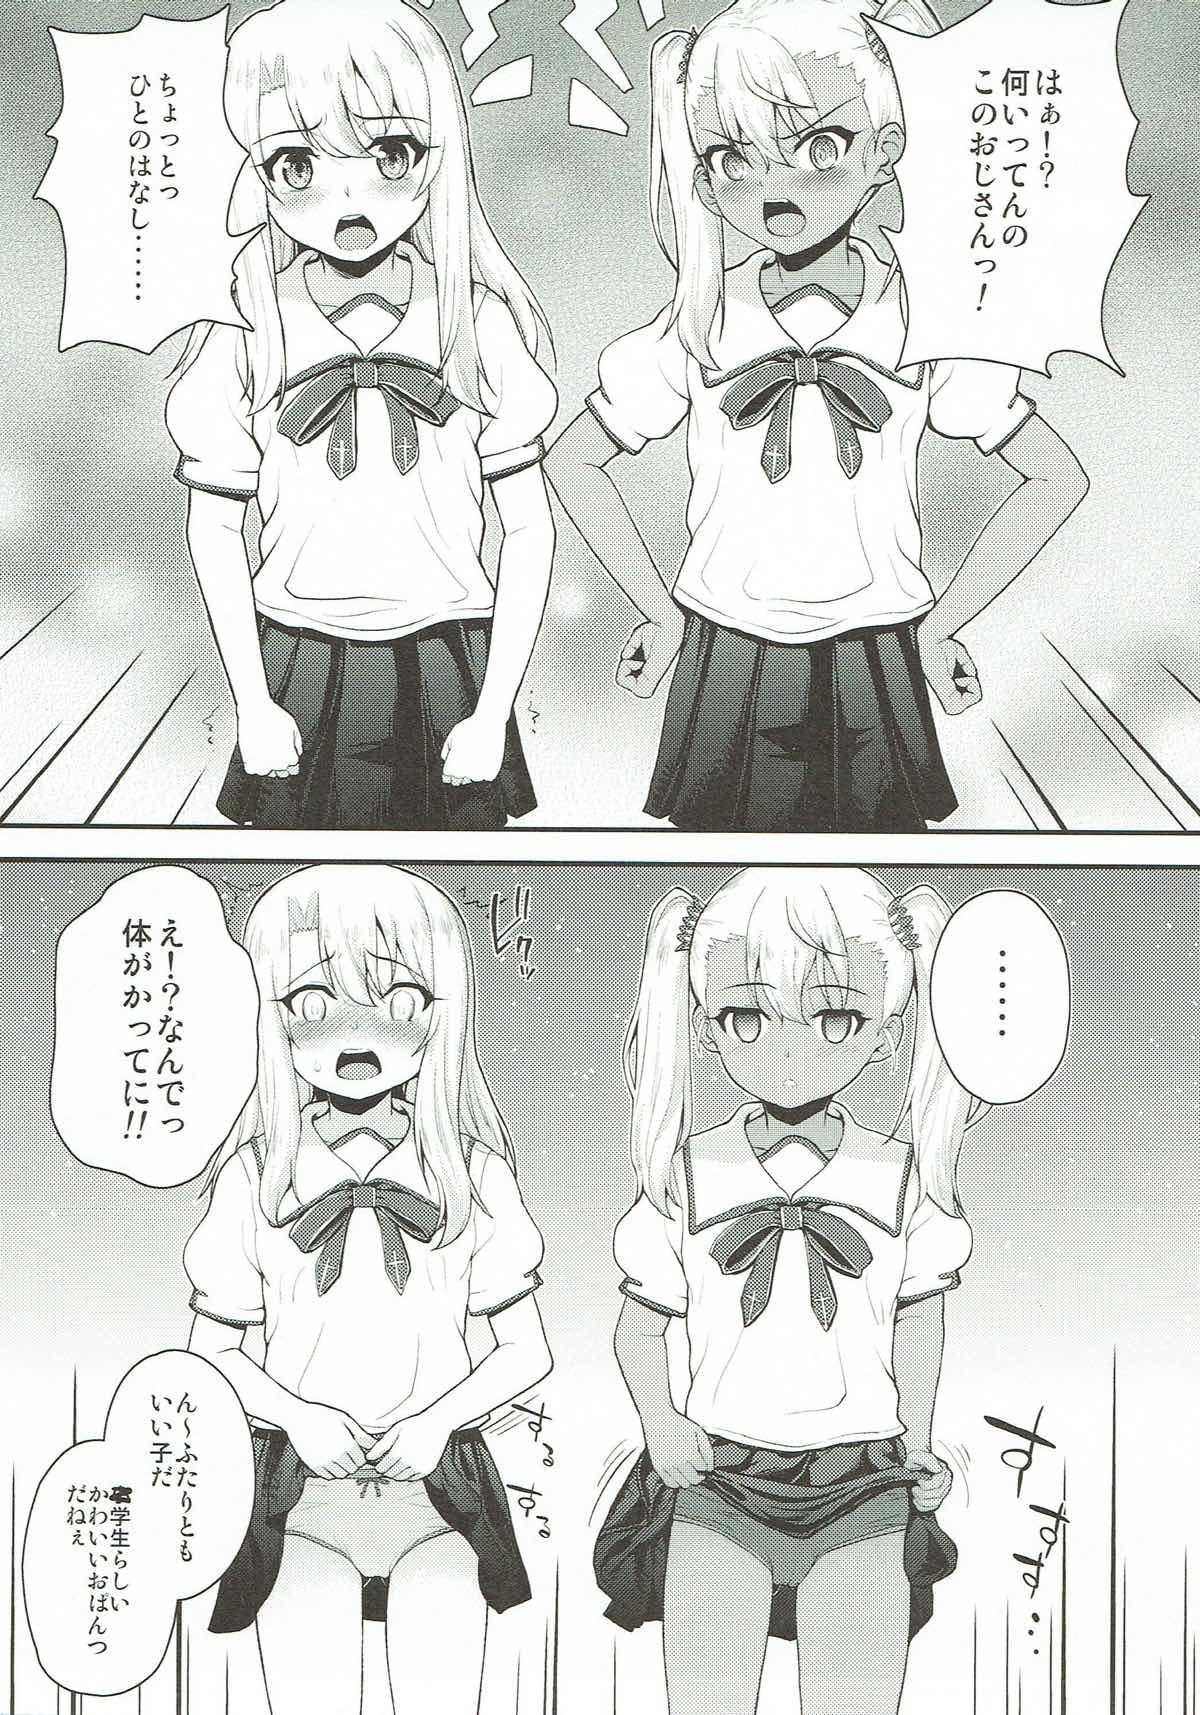 Clothed Saimin Choukyou Diary - Fate kaleid liner prisma illya Straight - Page 8